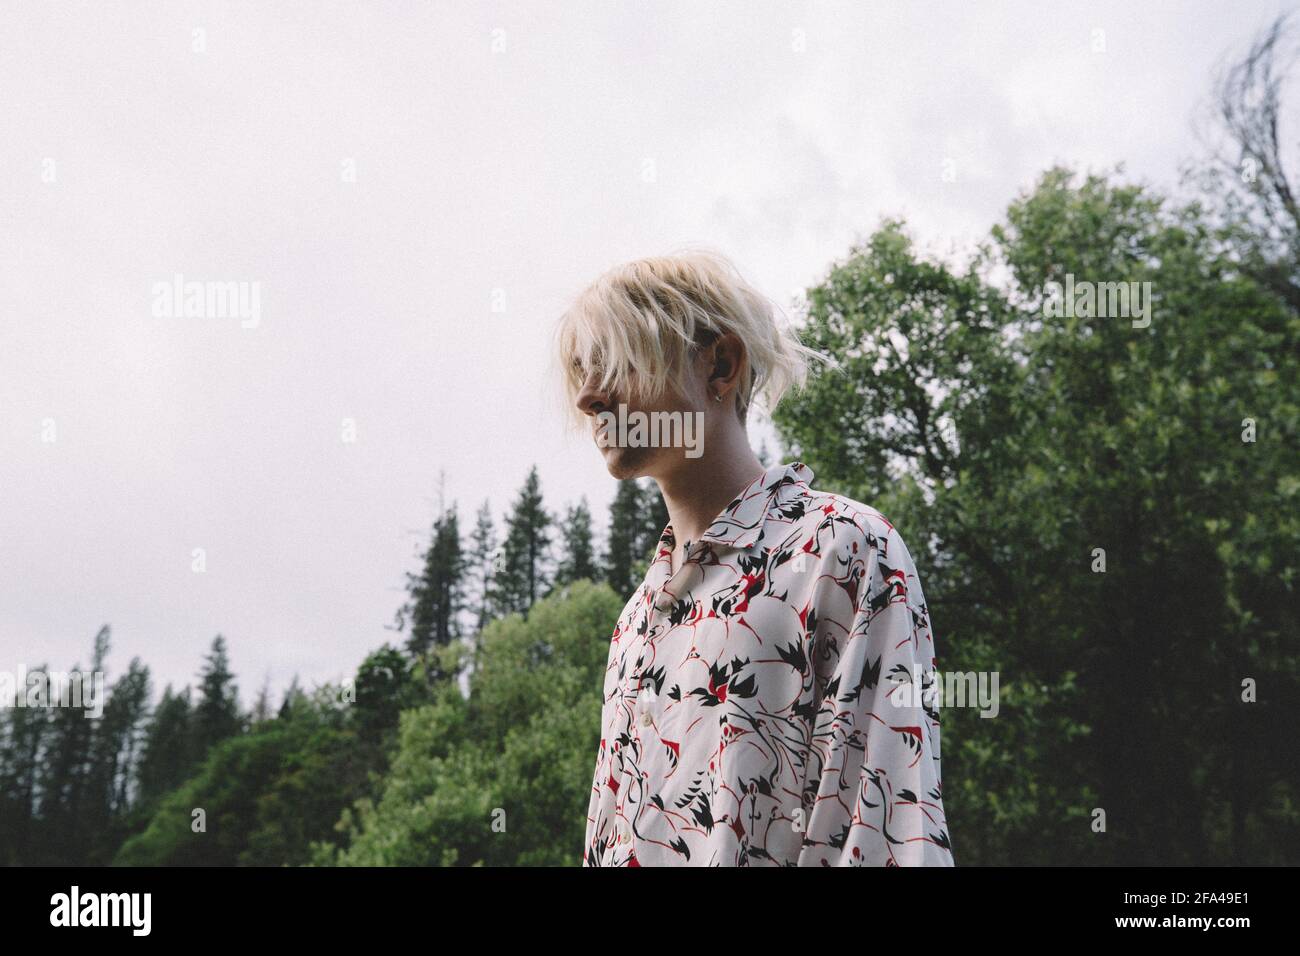 Low Angle Of Blonde Teen Standing Against Trees and Sky Stock Photo